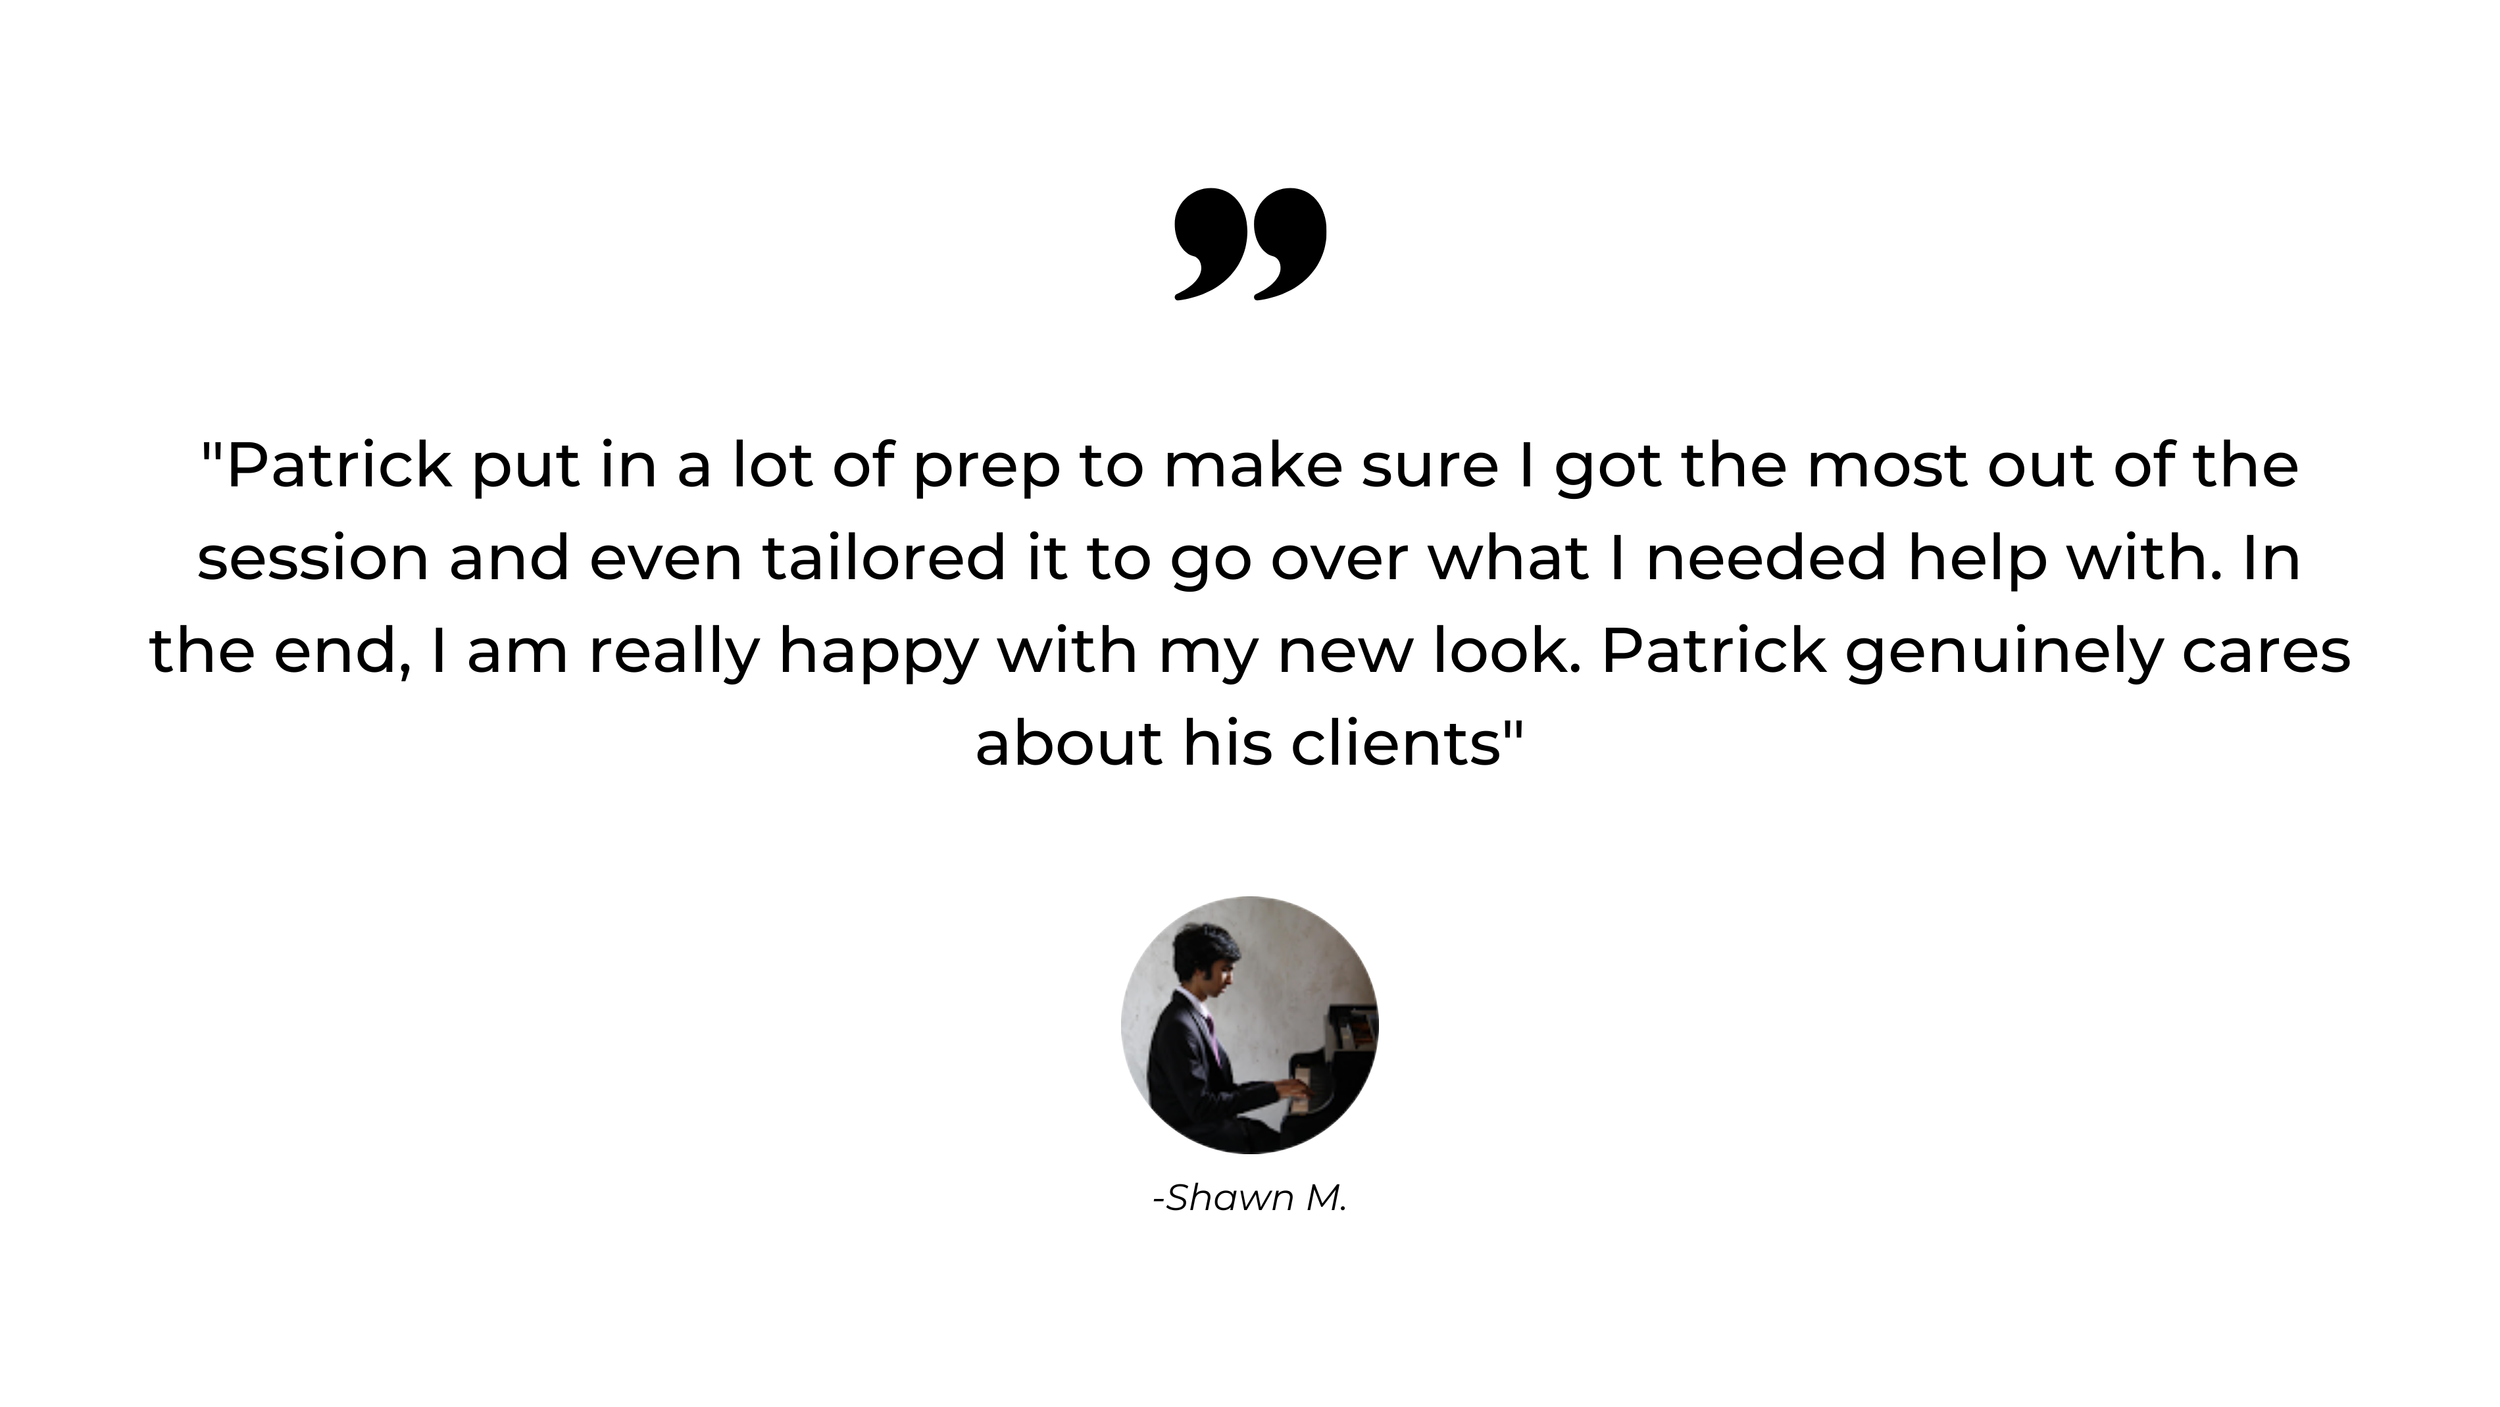 mens-personal-stylist-Pivot-Image-online-review-testimonial- (46).png